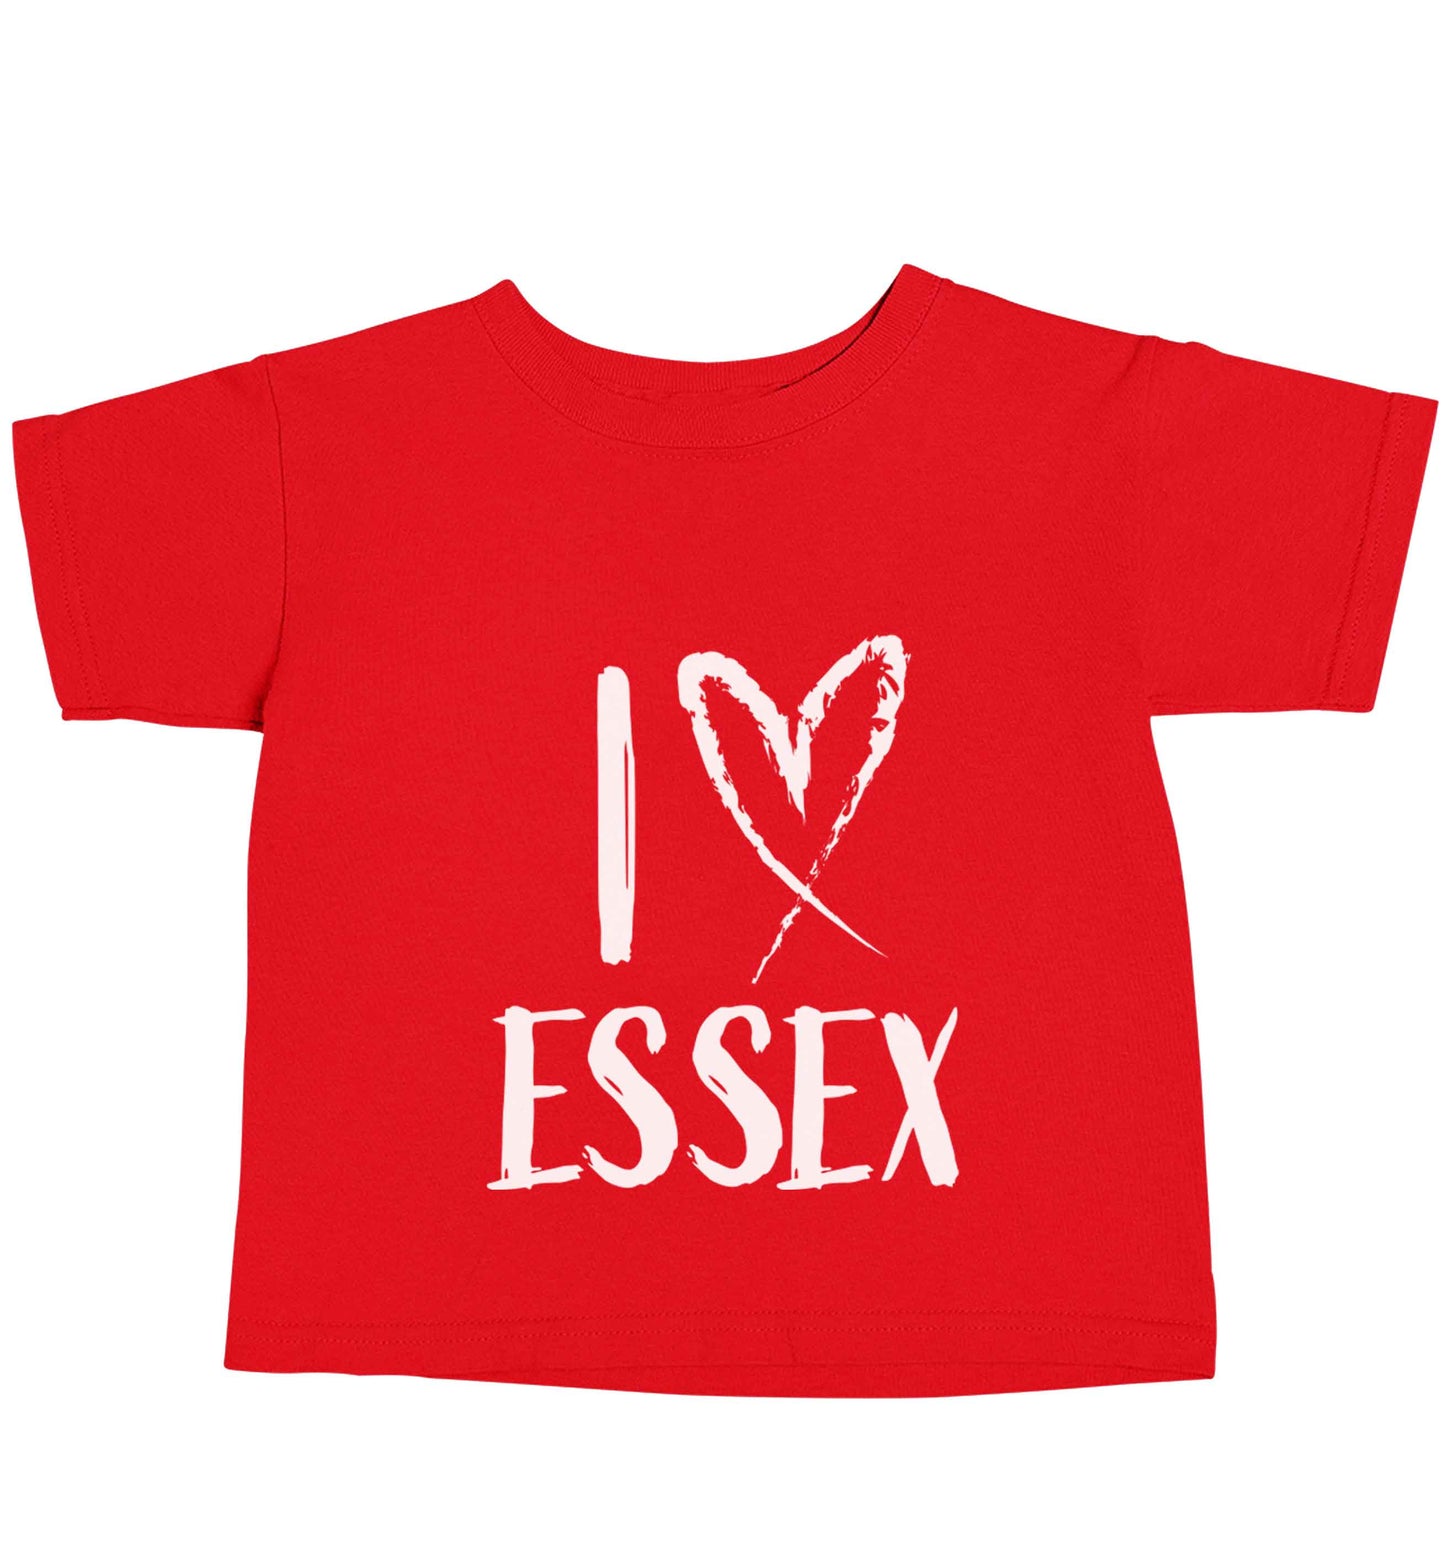 I love Essex red baby toddler Tshirt 2 Years